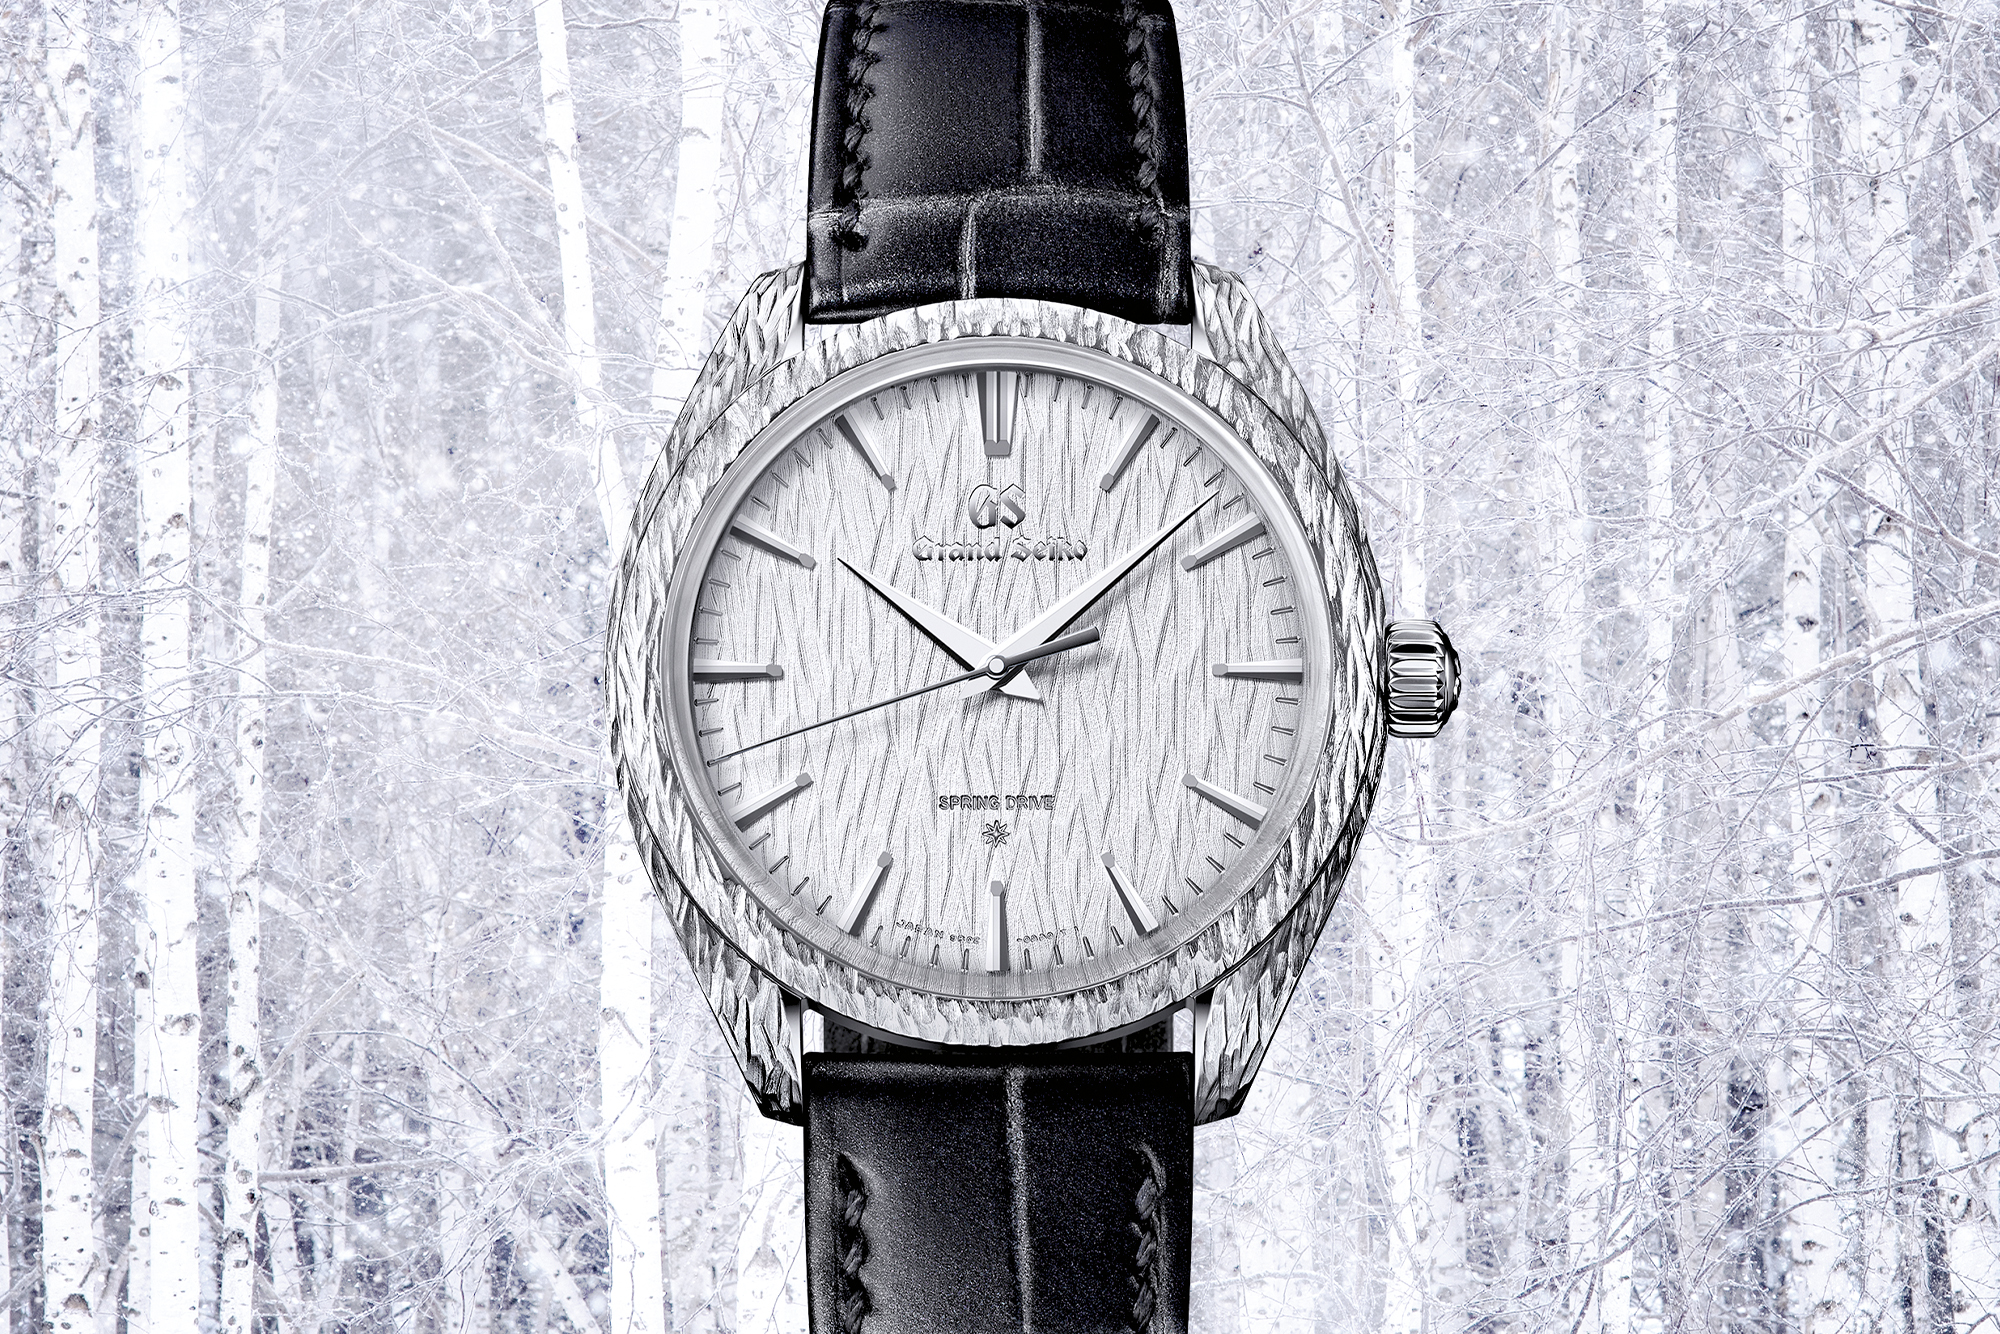 Grand Seiko Evolution 9 Collection SLGH005 silver dial inspired by nature